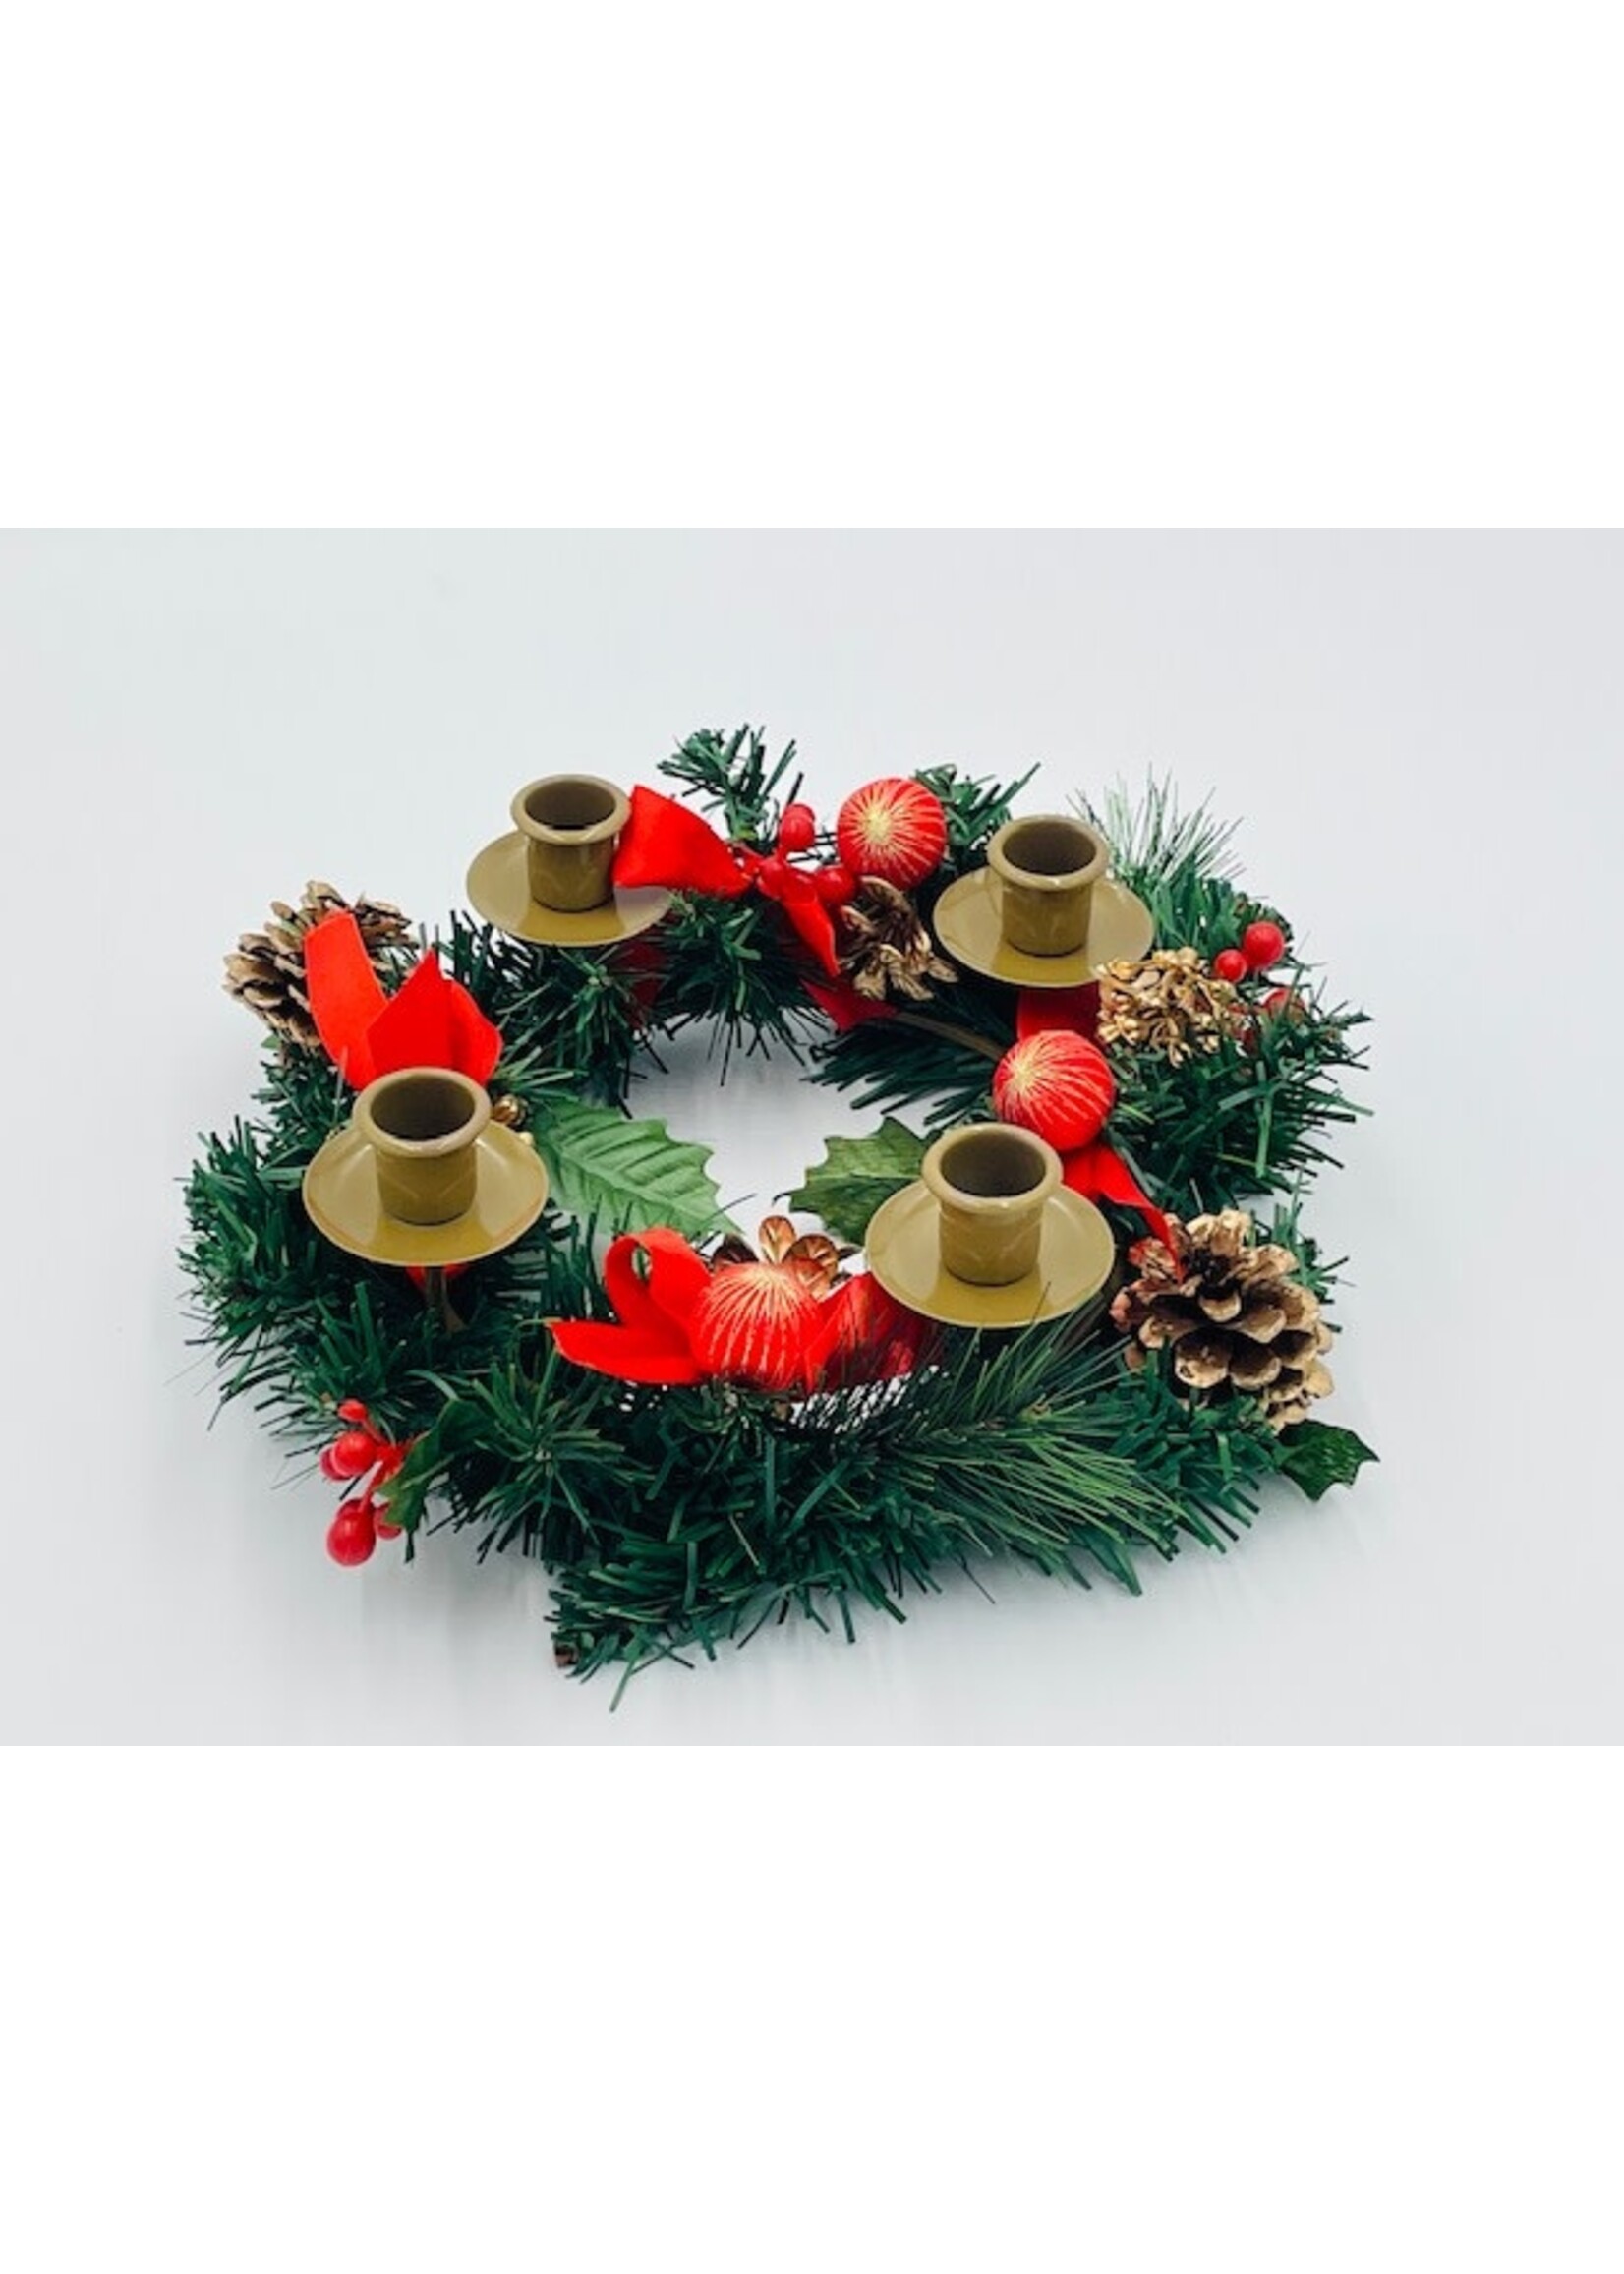 Advent Wreath with Red Berries & Ribbons